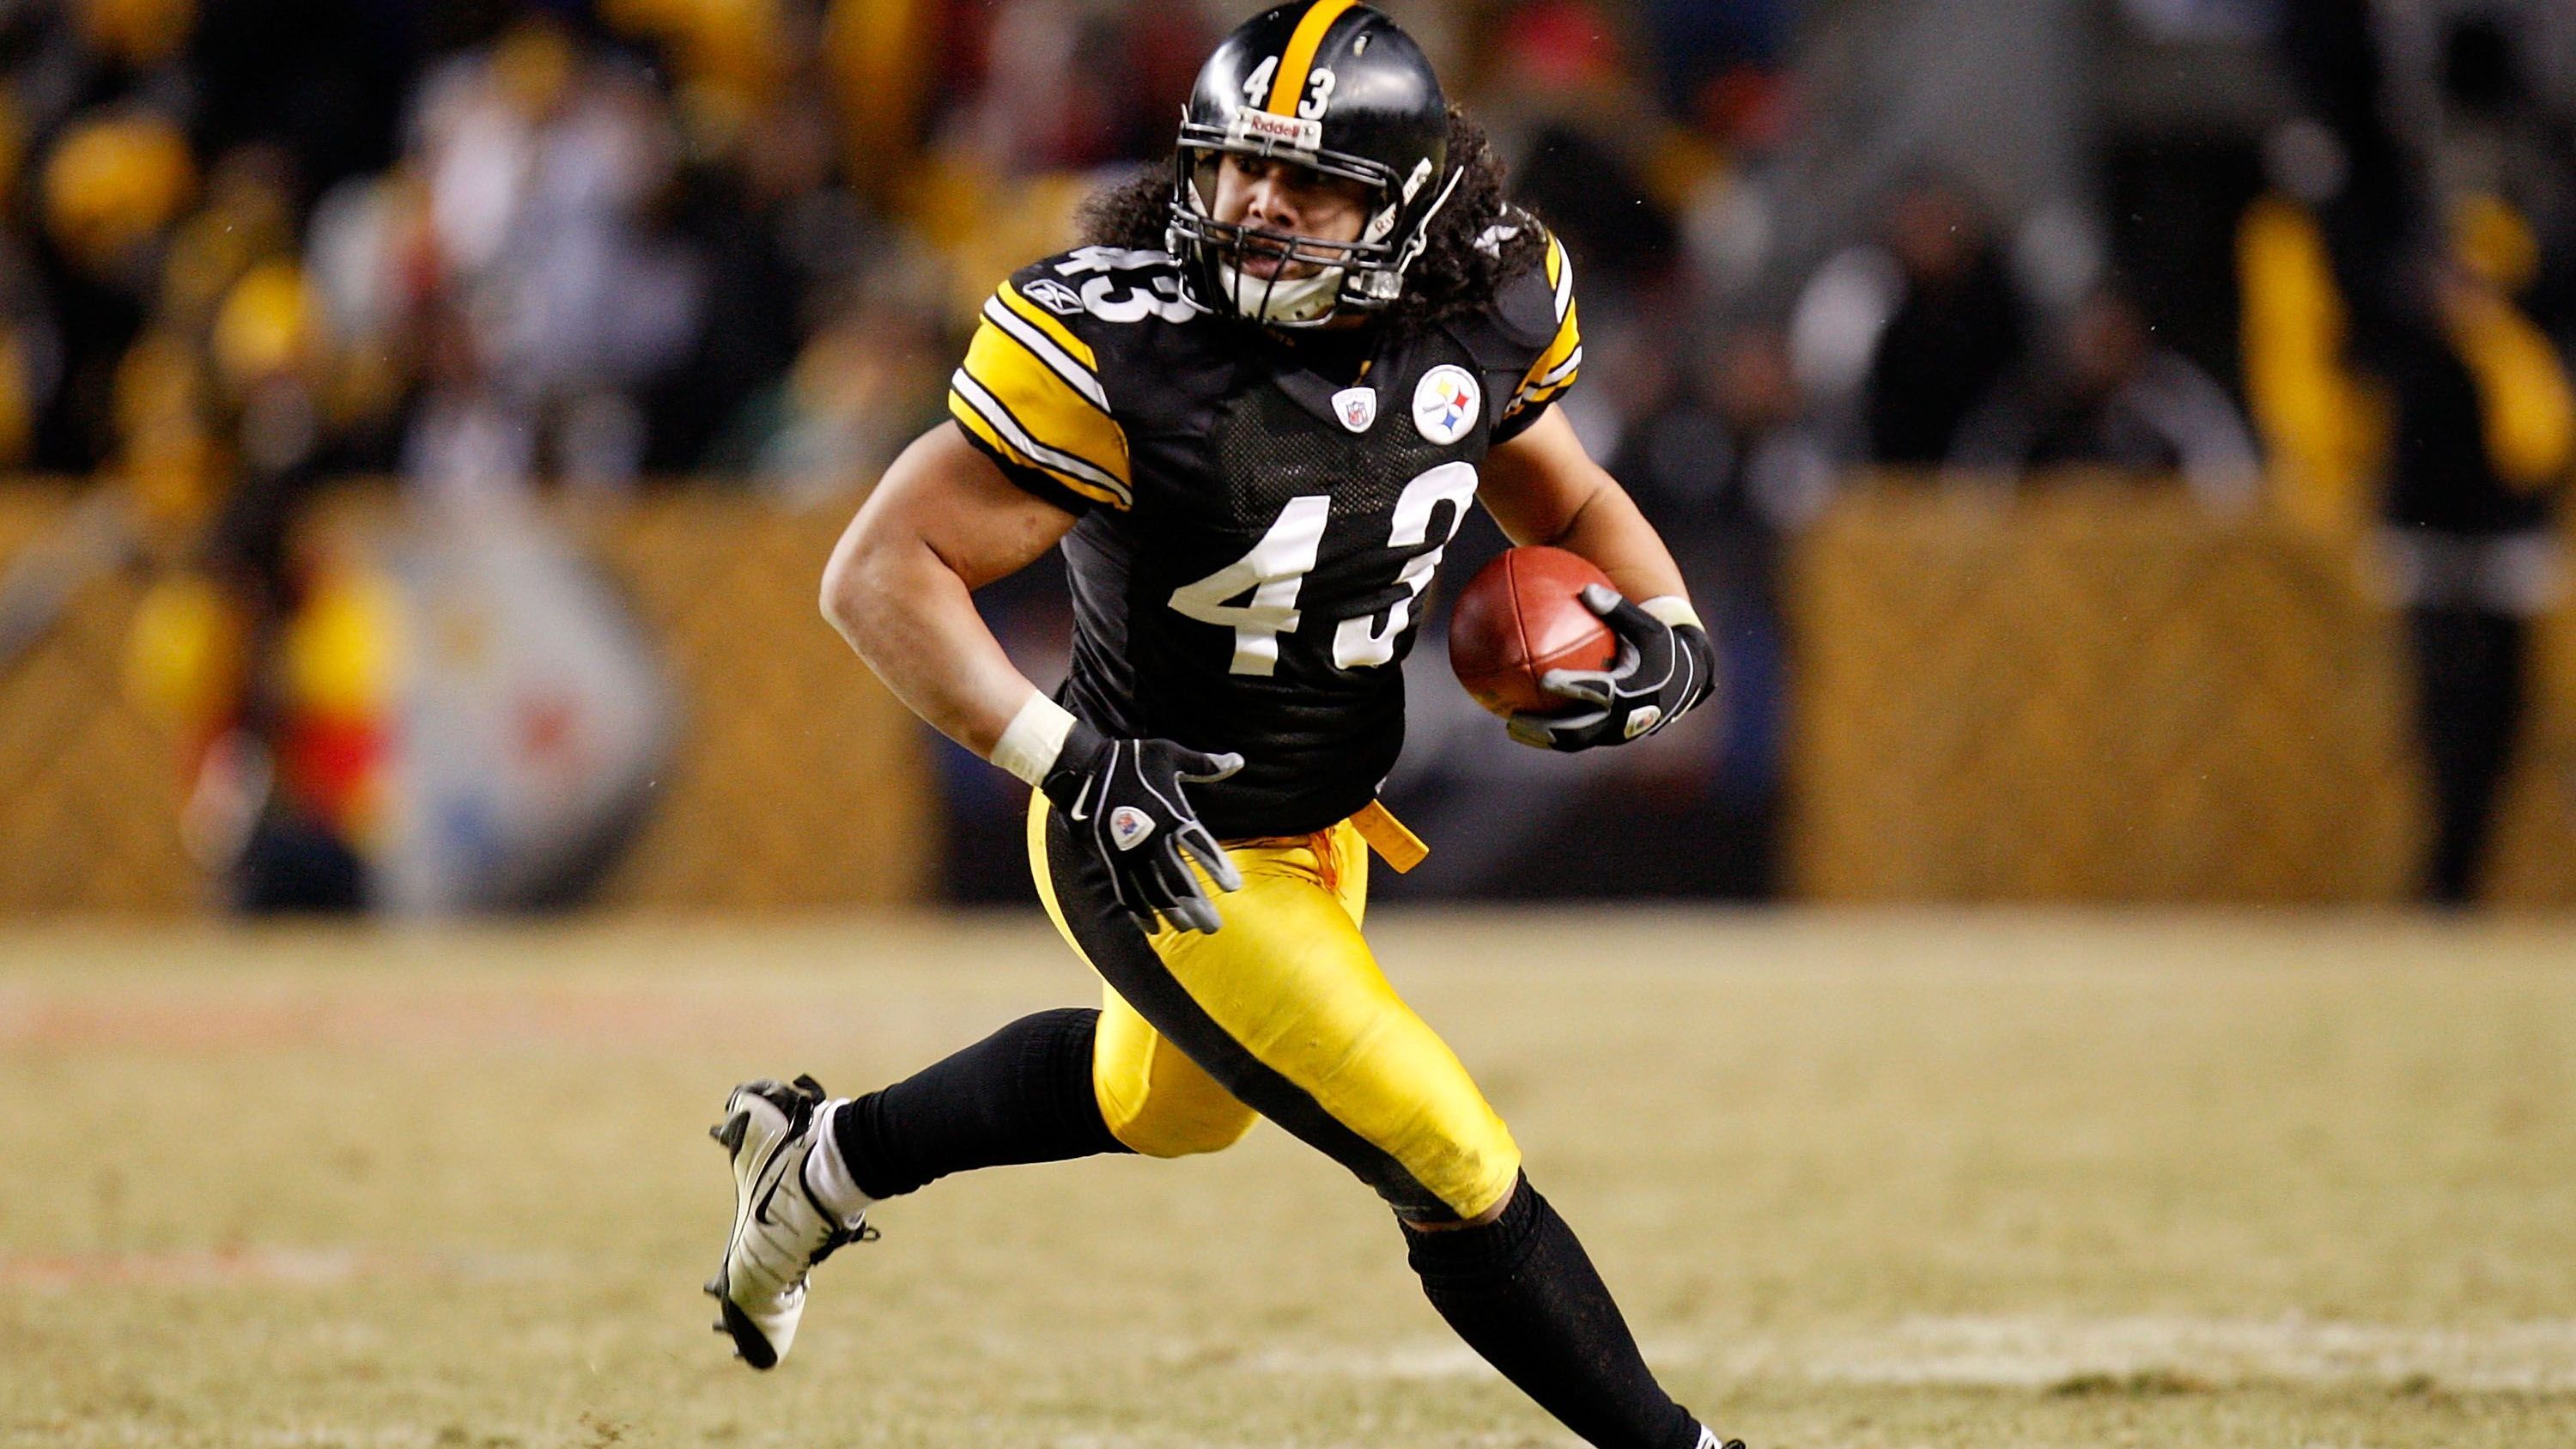 <strong>43: Troy Polamalu</strong><br>Team: Pittsburgh Steelers<br>Position: Safety<br>Erfolge: Pro Football Hall of Famer, zweimaliger Super-Bowl-Champion, 2010 NFL Defensive Player of the Year<br>Honorable Mentions: Cliff Harris